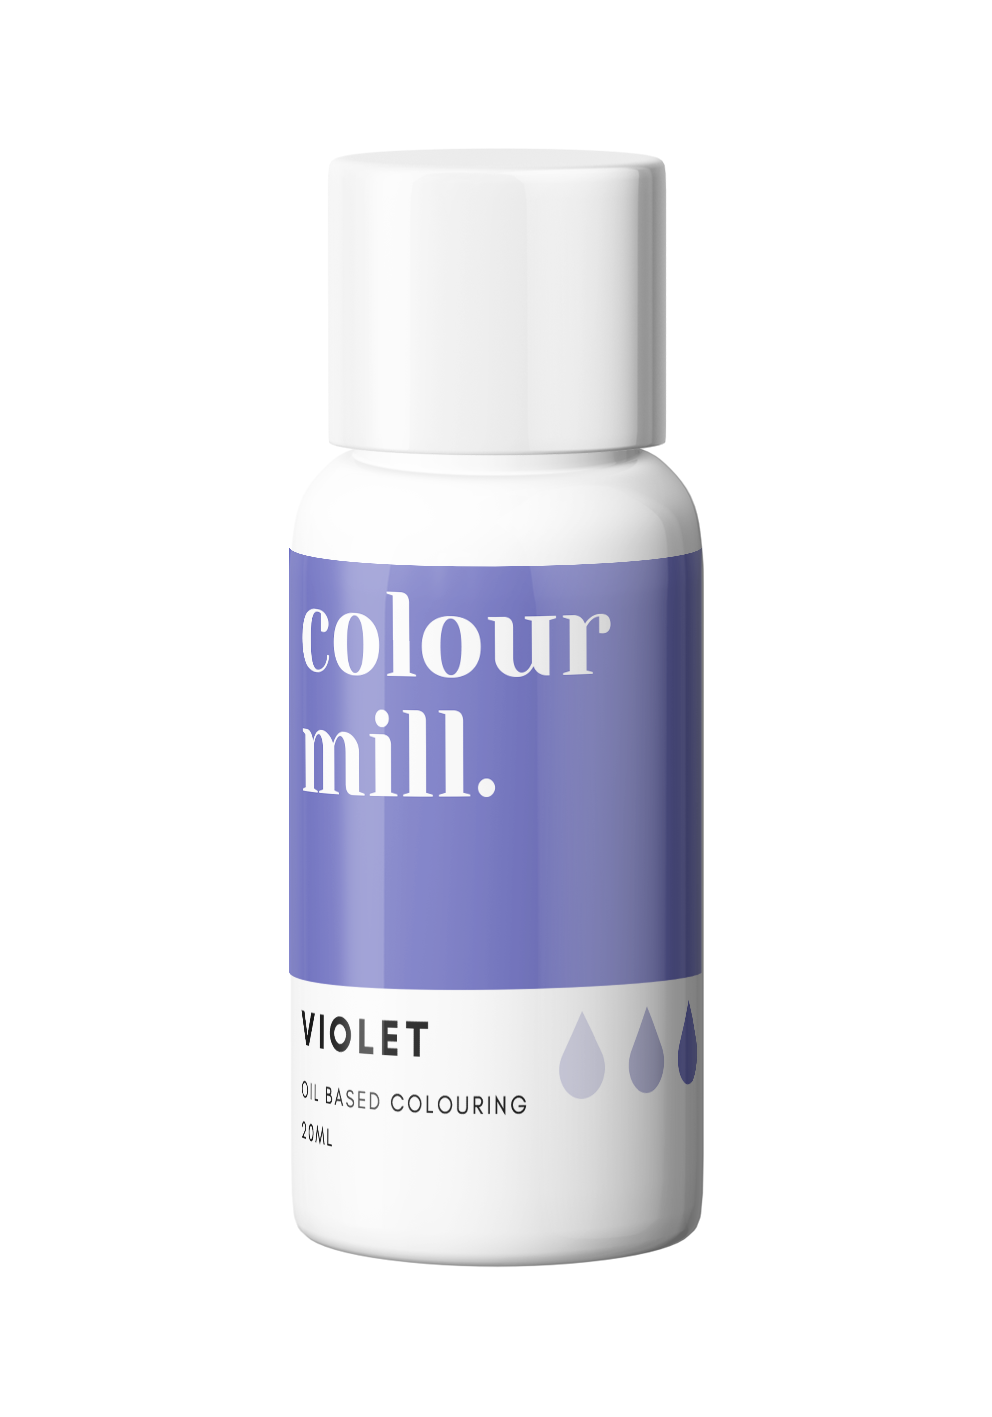 Colour Mill Oil Based Colouring 20ml - Violet